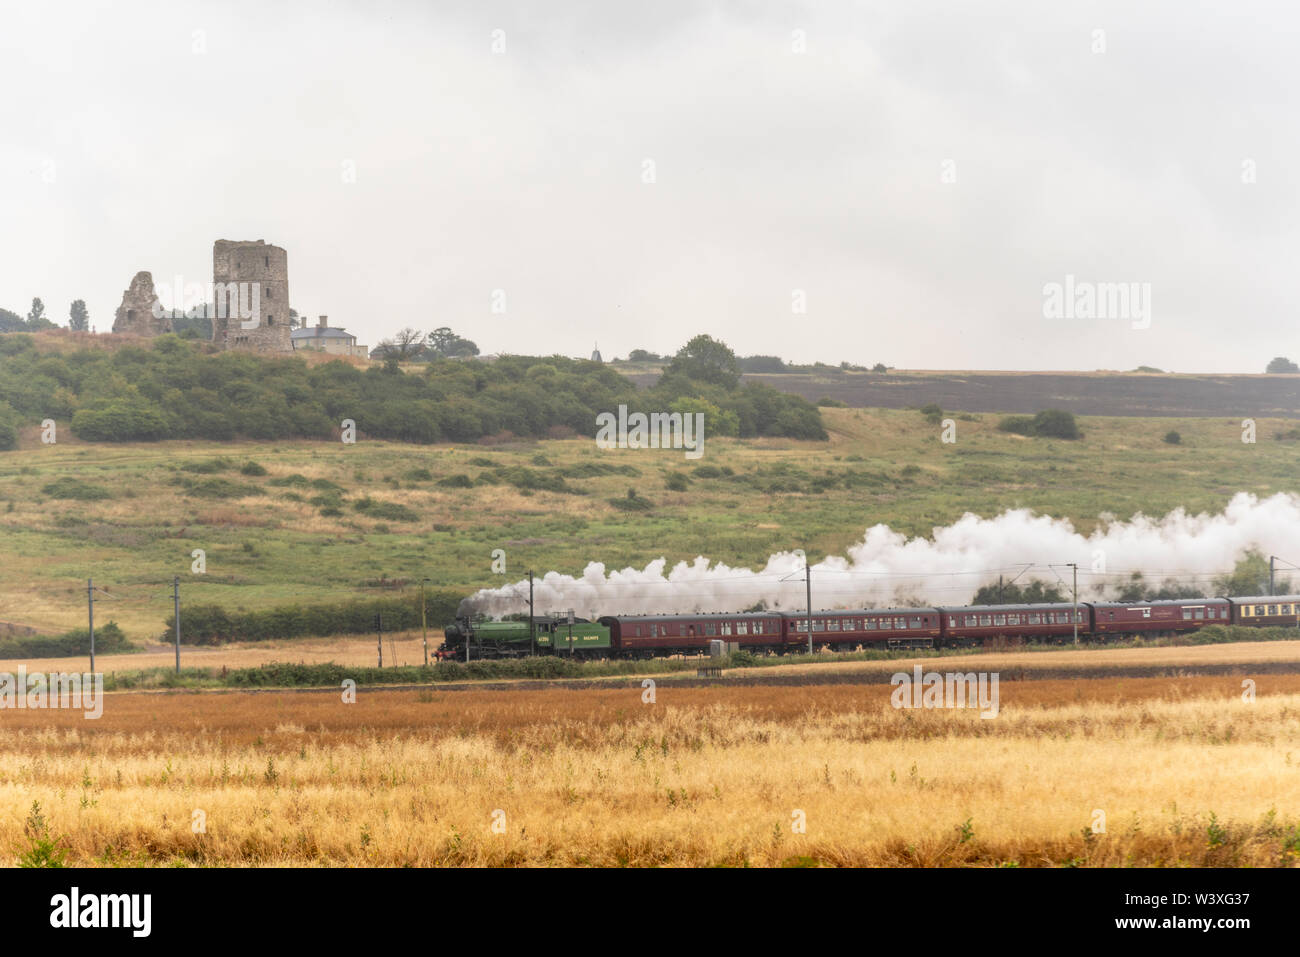 BR B1 class steam locomotive 'Mayflower' number 61306 is seen passing through Hadleigh Marsh in the rain below the ruins of the 13th century Hadleigh Castle on its way from Southend East station in Essex towards Winchester in Hampshire, hauling a Steam Dreams steam special train of vintage carriages. 'Mayflower' has recently received an overhaul and is resplendent in BR apple green livery Stock Photo